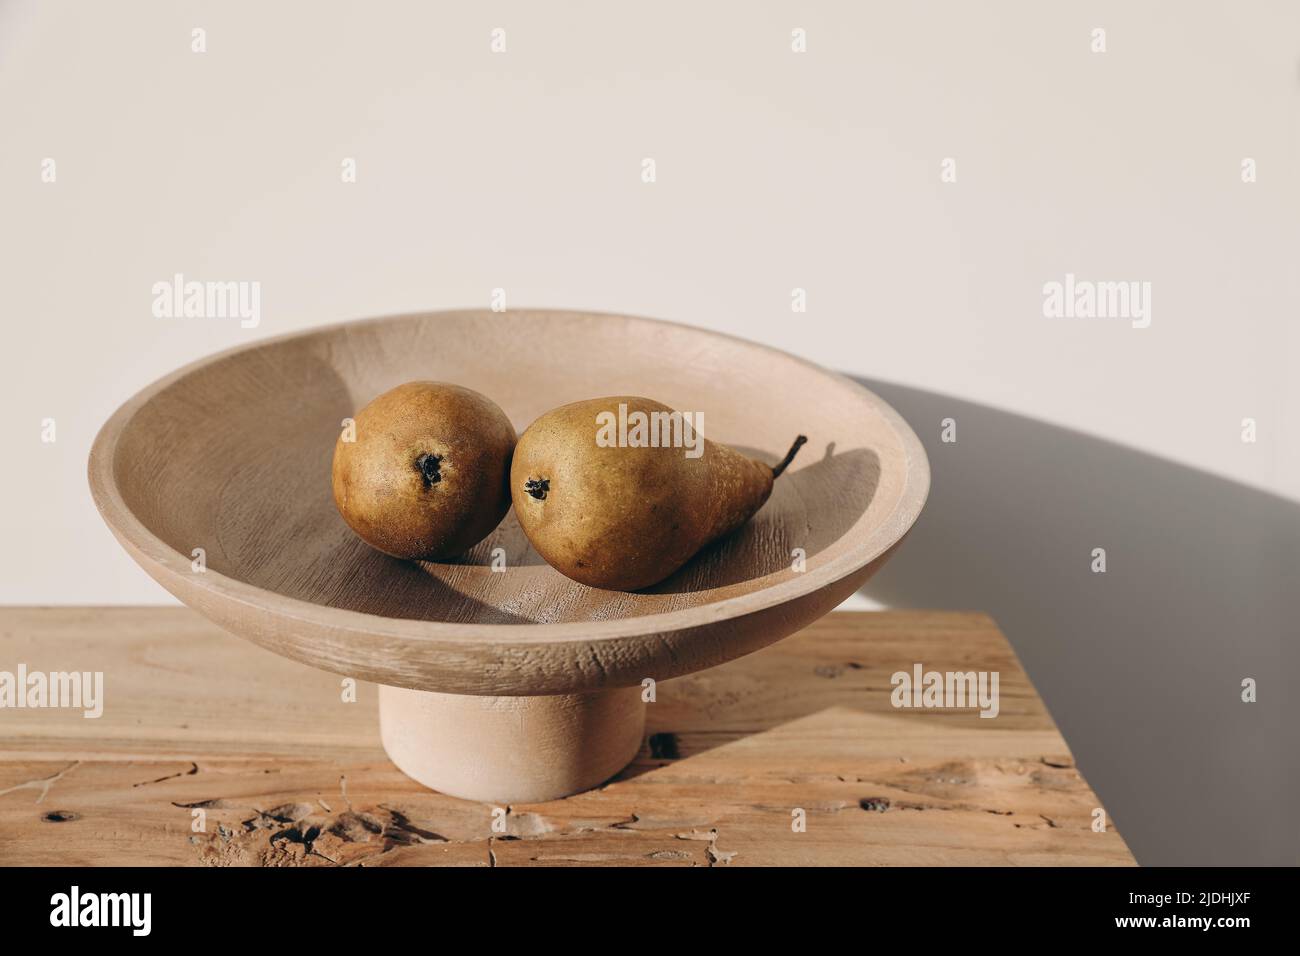 Autumn, summer fruit food still life. Couple of yellow pears, wooden bowl on table in sunset light. Blurred beige wall background, long shadows. Selec Stock Photo